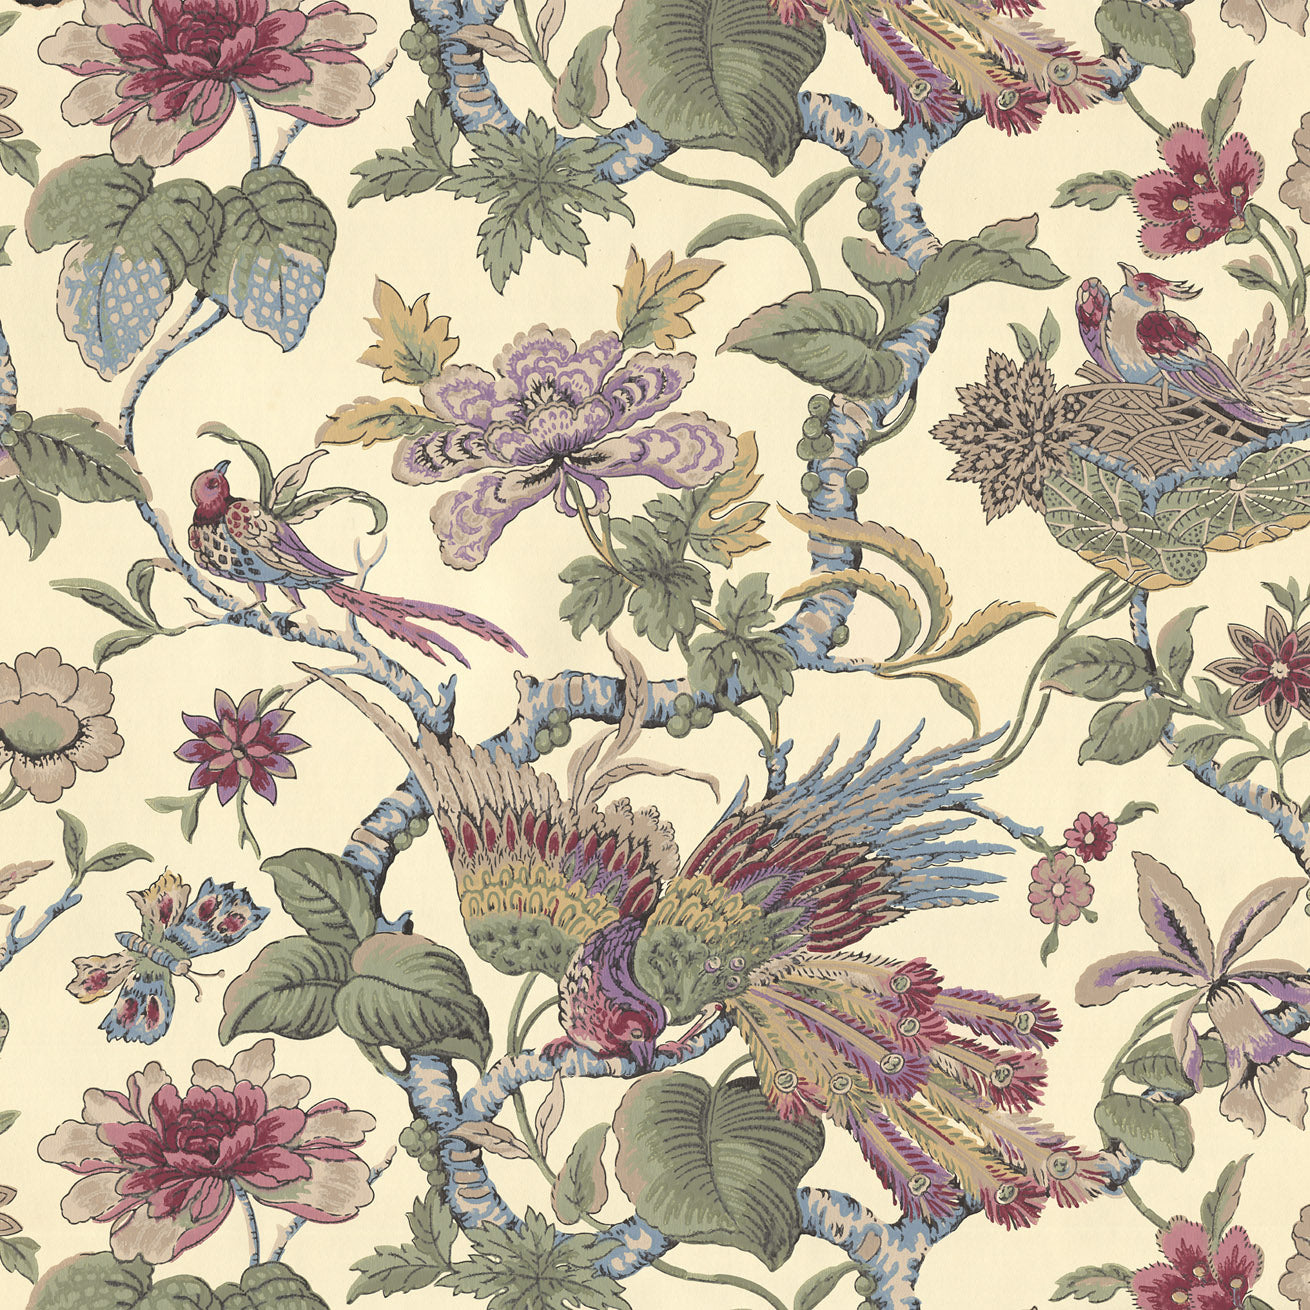 Feathered Bird Amid Flowering Vines/Antique Wallpaper - Bolling & Company